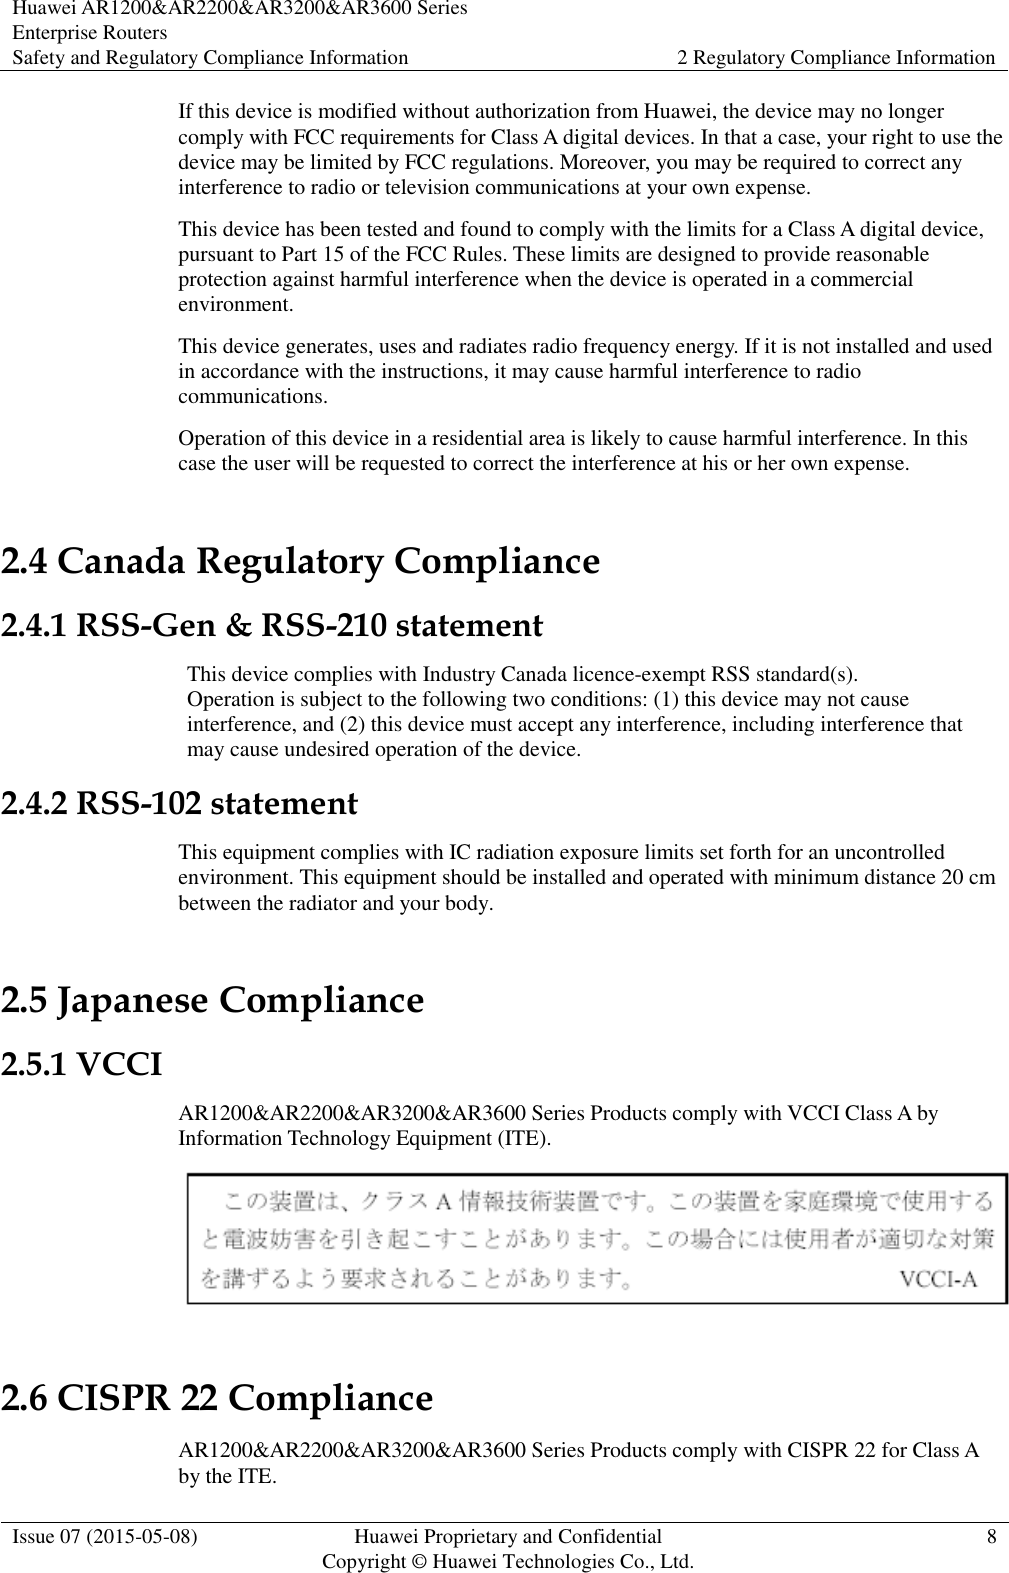 Huawei AR1200&amp;AR2200&amp;AR3200&amp;AR3600 Series Enterprise Routers Safety and Regulatory Compliance Information 2 Regulatory Compliance Information  Issue 07 (2015-05-08) Huawei Proprietary and Confidential           Copyright © Huawei Technologies Co., Ltd. 8  If this device is modified without authorization from Huawei, the device may no longer comply with FCC requirements for Class A digital devices. In that a case, your right to use the device may be limited by FCC regulations. Moreover, you may be required to correct any interference to radio or television communications at your own expense. This device has been tested and found to comply with the limits for a Class A digital device, pursuant to Part 15 of the FCC Rules. These limits are designed to provide reasonable protection against harmful interference when the device is operated in a commercial environment. This device generates, uses and radiates radio frequency energy. If it is not installed and used in accordance with the instructions, it may cause harmful interference to radio communications. Operation of this device in a residential area is likely to cause harmful interference. In this case the user will be requested to correct the interference at his or her own expense. 2.4 Canada Regulatory Compliance 2.4.1 RSS-Gen &amp; RSS-210 statement This device complies with Industry Canada licence-exempt RSS standard(s). Operation is subject to the following two conditions: (1) this device may not cause interference, and (2) this device must accept any interference, including interference that may cause undesired operation of the device. 2.4.2 RSS-102 statement This equipment complies with IC radiation exposure limits set forth for an uncontrolled environment. This equipment should be installed and operated with minimum distance 20 cm between the radiator and your body. 2.5 Japanese Compliance 2.5.1 VCCI AR1200&amp;AR2200&amp;AR3200&amp;AR3600 Series Products comply with VCCI Class A by Information Technology Equipment (ITE).    2.6 CISPR 22 Compliance AR1200&amp;AR2200&amp;AR3200&amp;AR3600 Series Products comply with CISPR 22 for Class A by the ITE.   